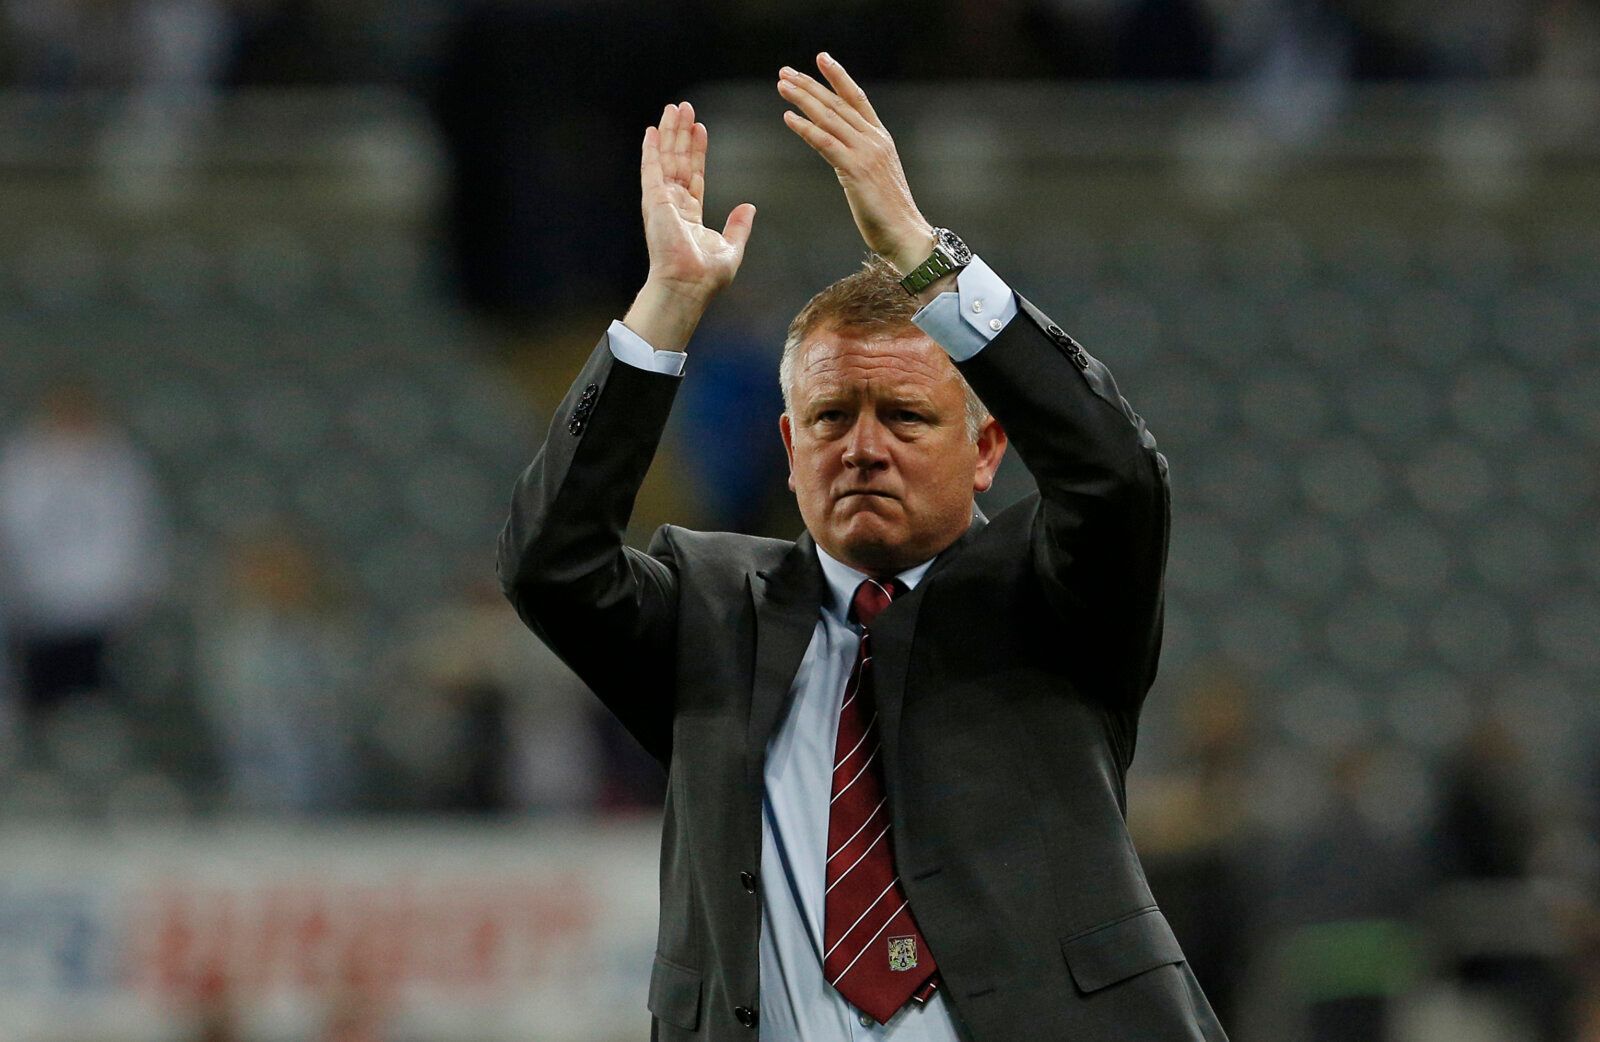 Football - Newcastle United v Northampton Town - Capital One Cup Second Round - St James' Park - 25/8/15 
Northampton manager Chris Wilder applauds the fans at the end of the match 
Mandatory Credit: Action Images / Craig Brough 
Livepic 
EDITORIAL USE ONLY. No use with unauthorized audio, video, data, fixture lists, club/league logos or 